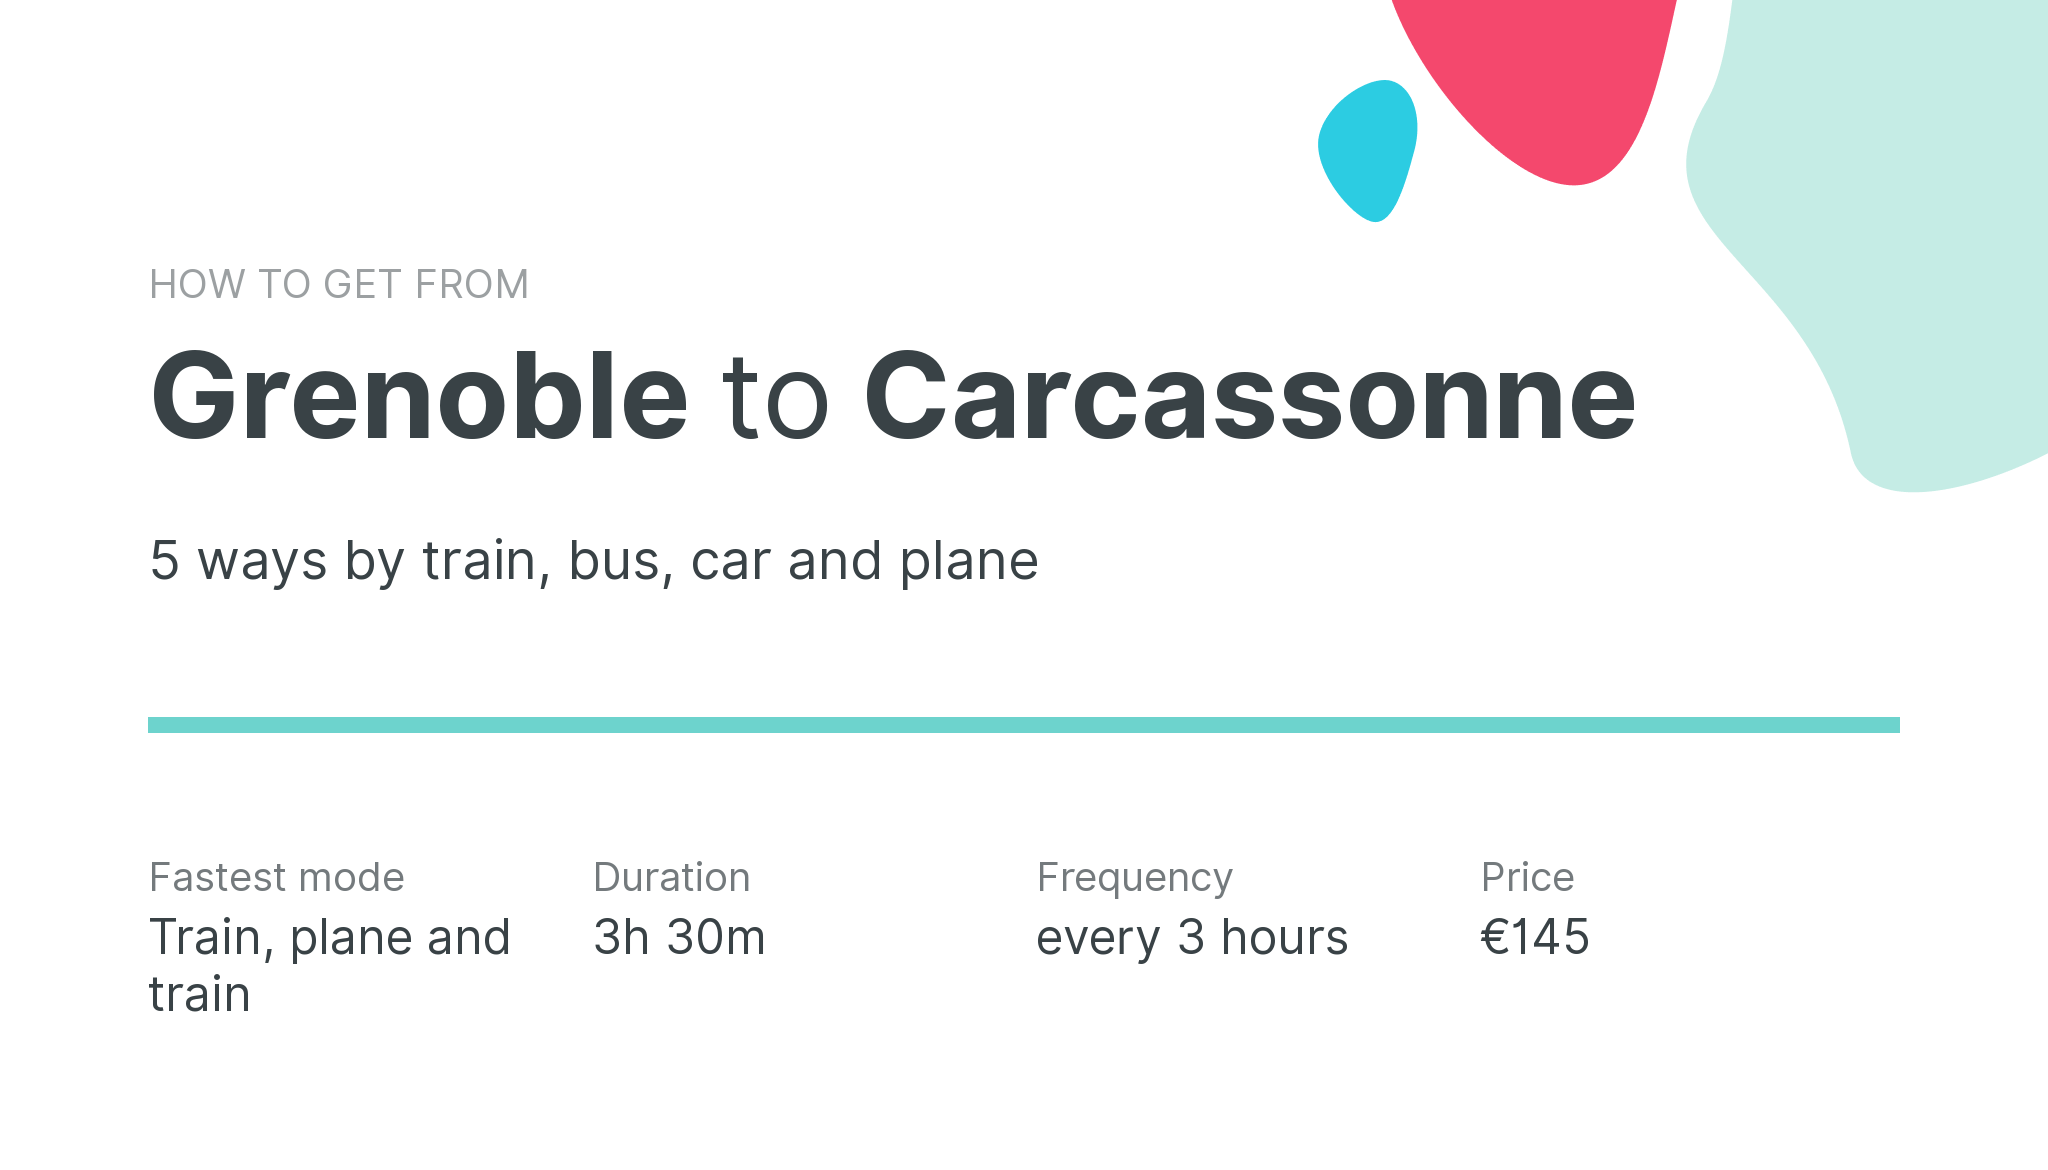 How do I get from Grenoble to Carcassonne